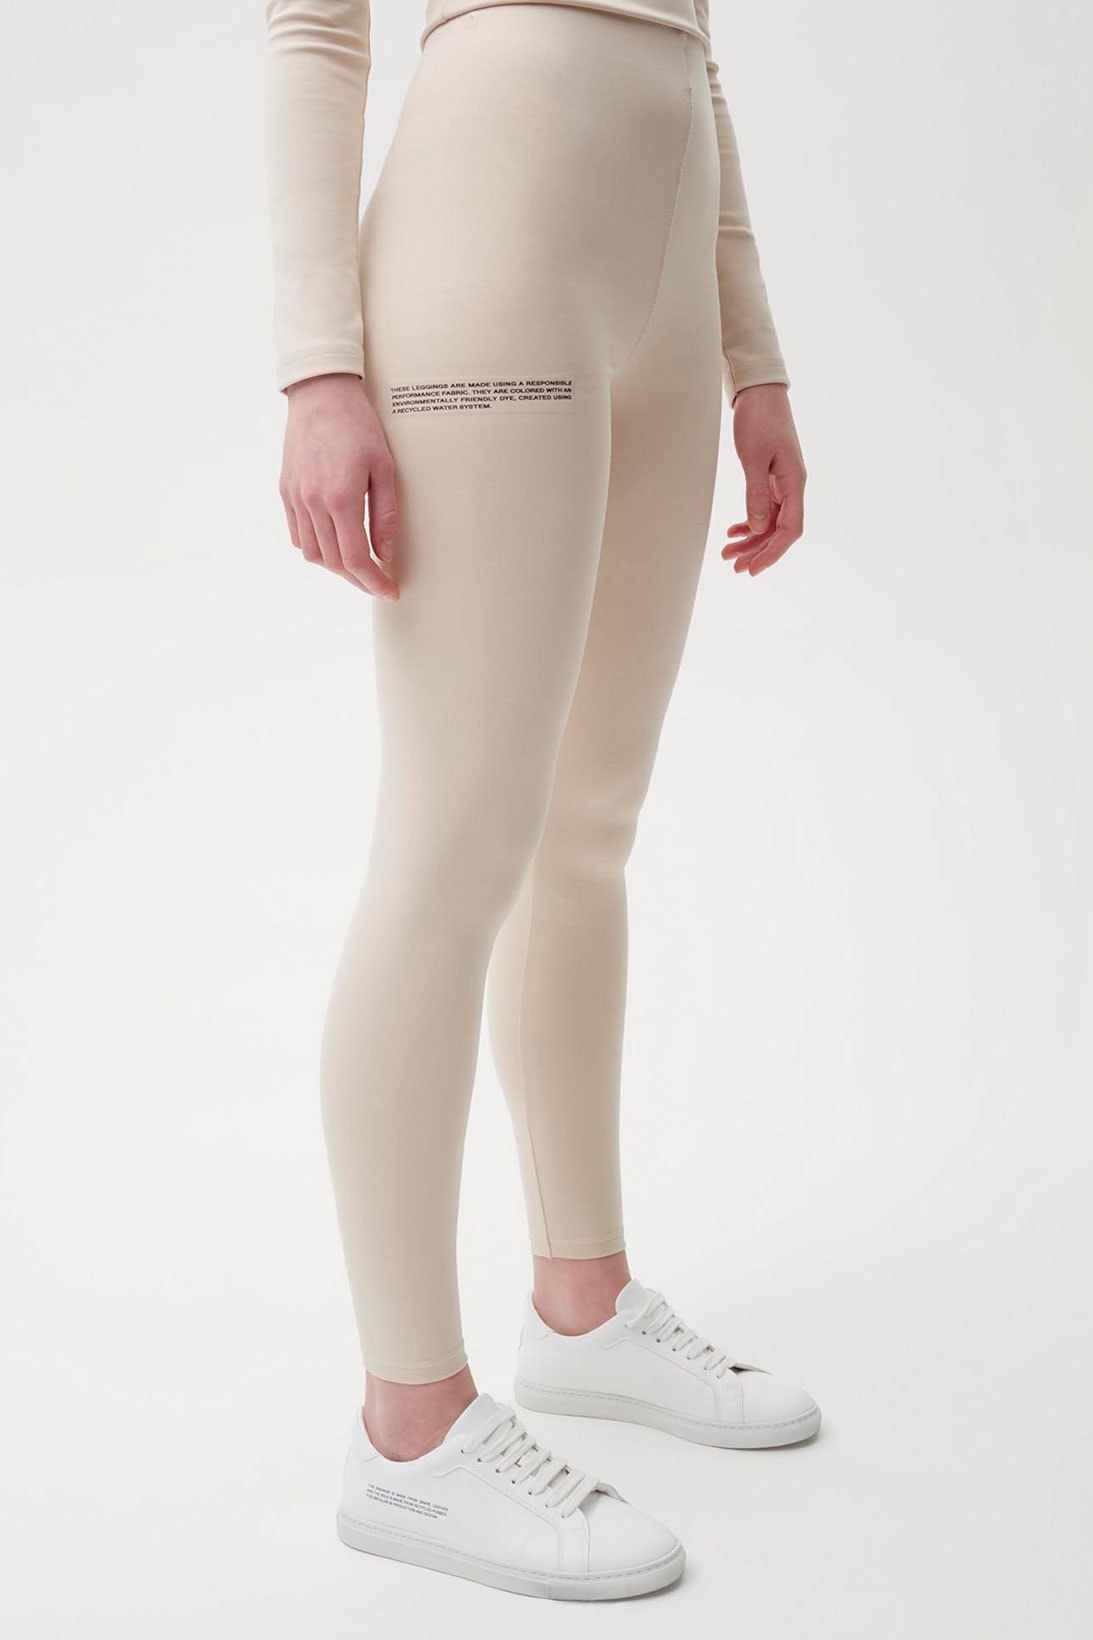 pangaia roica stretch athleisure sustainable collection turtleneck top leggings beige